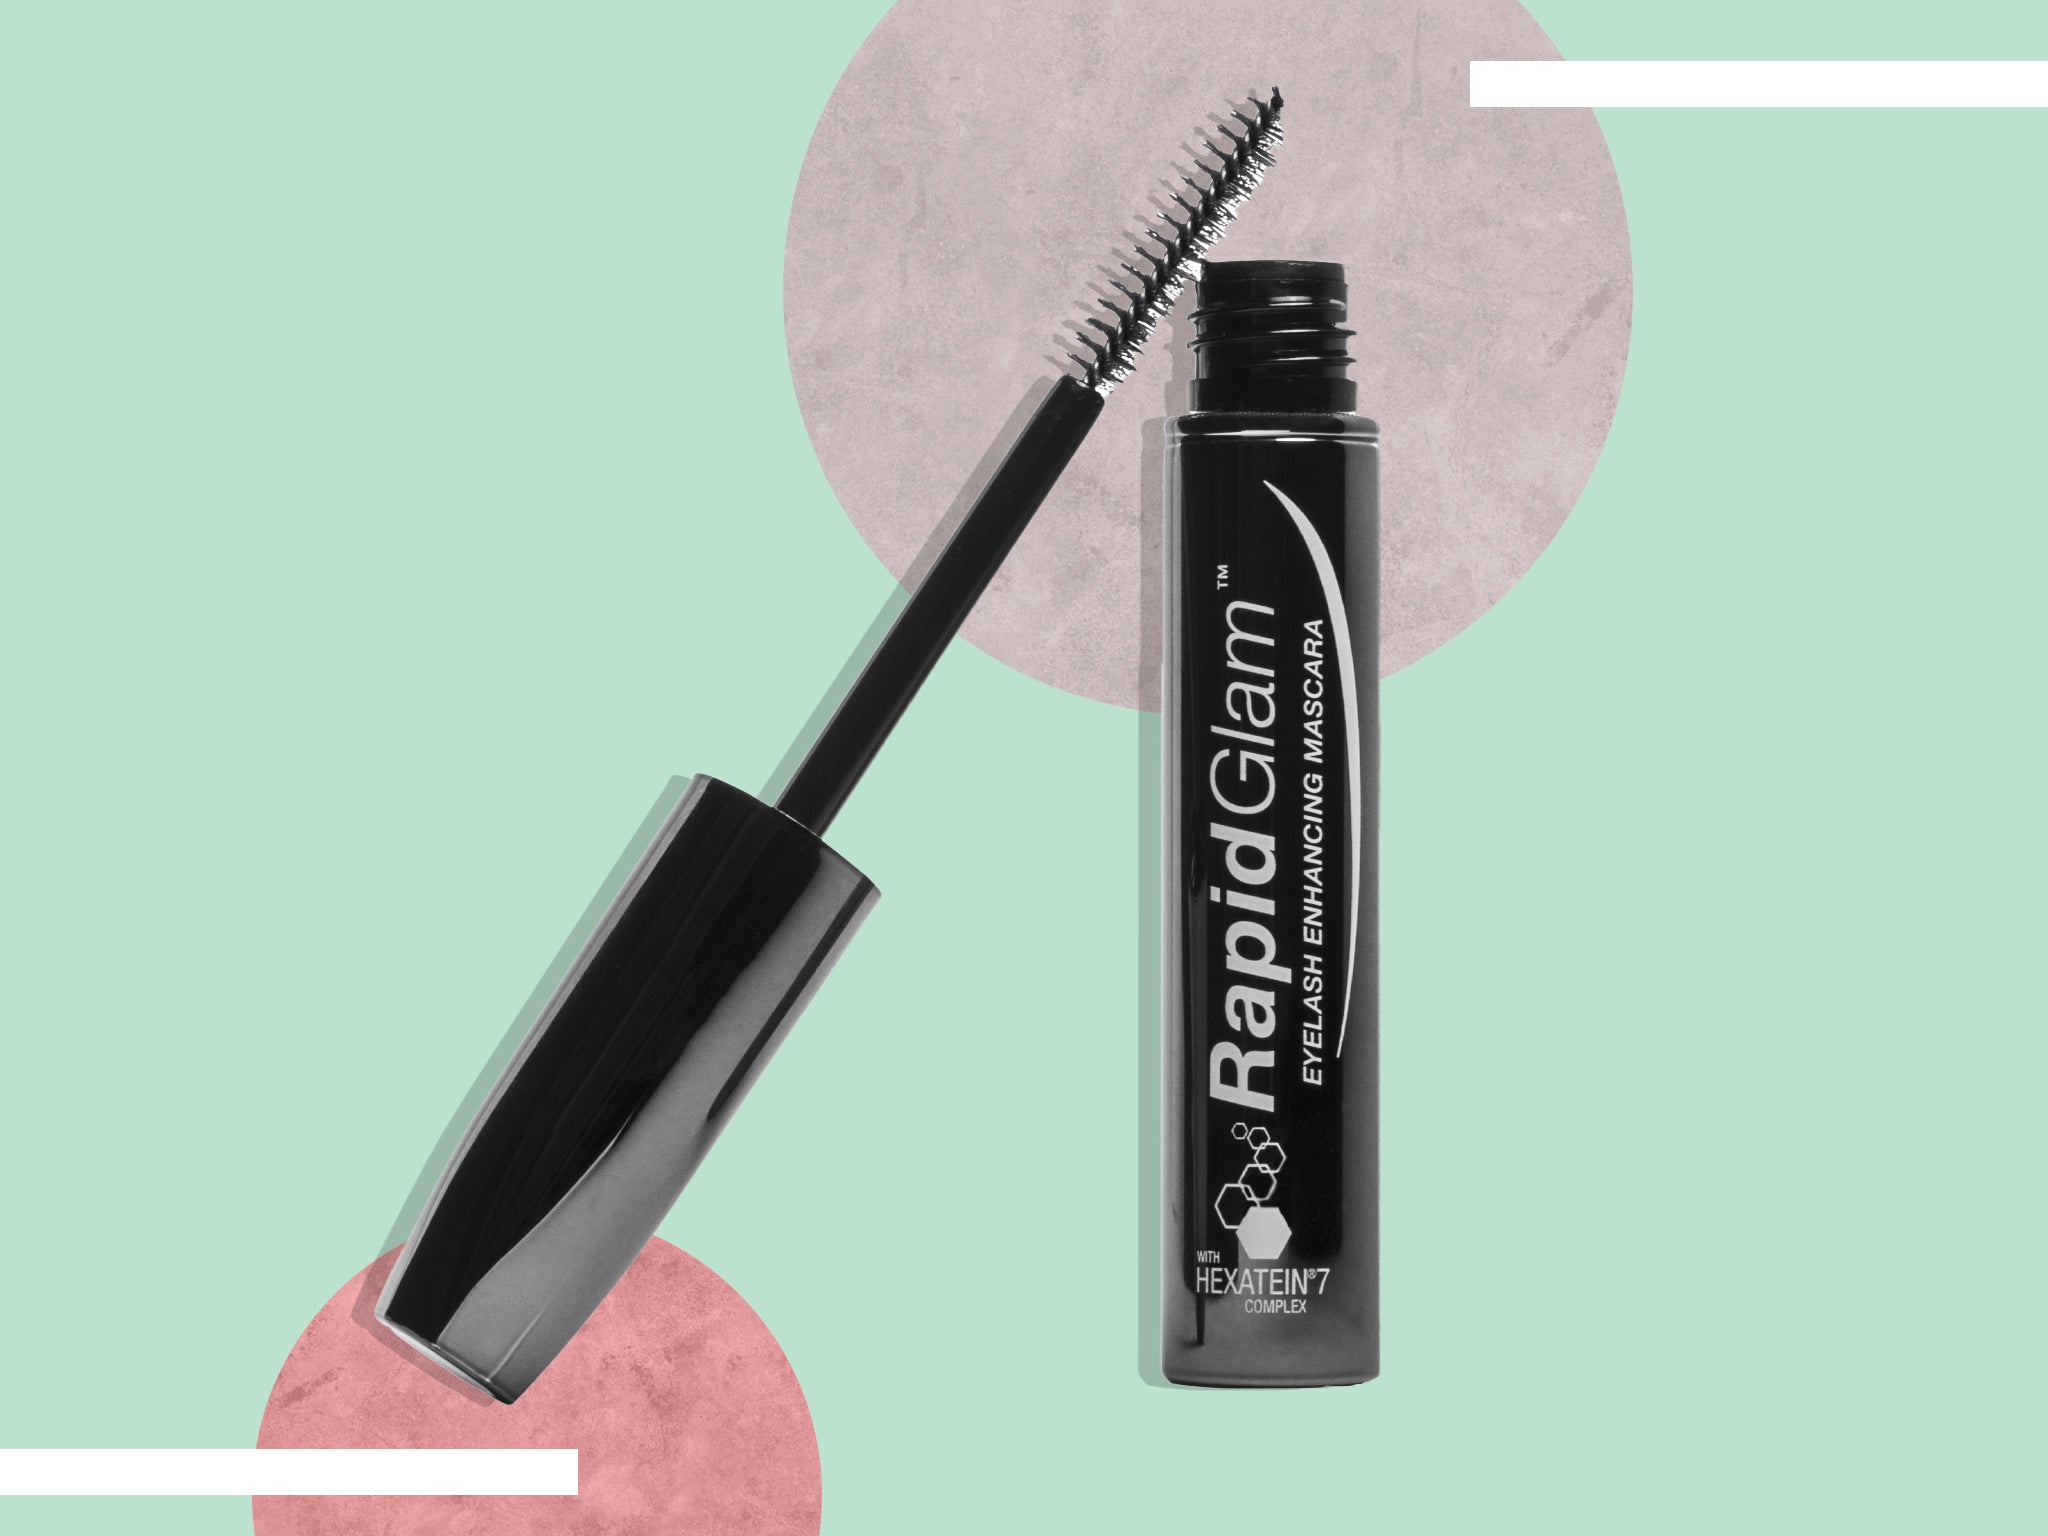 This two-in-one lash serum and mascara takes the fuss out of the application and simplifies our beauty routine